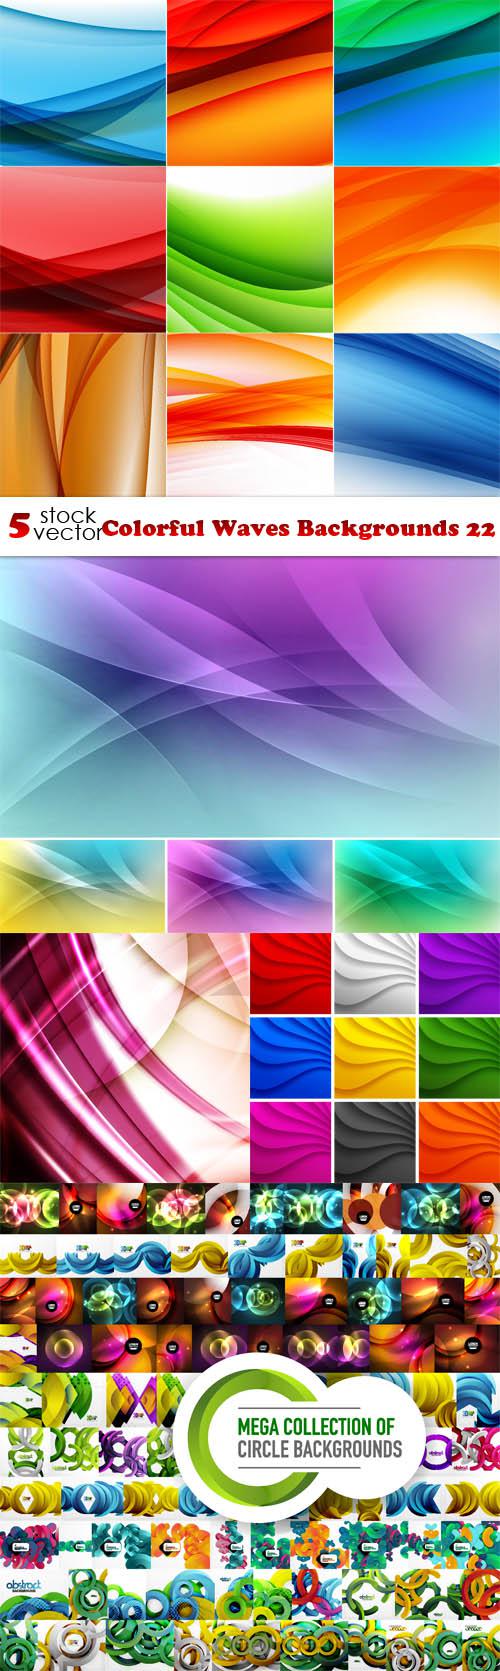 Colorful Waves Backgrounds 22